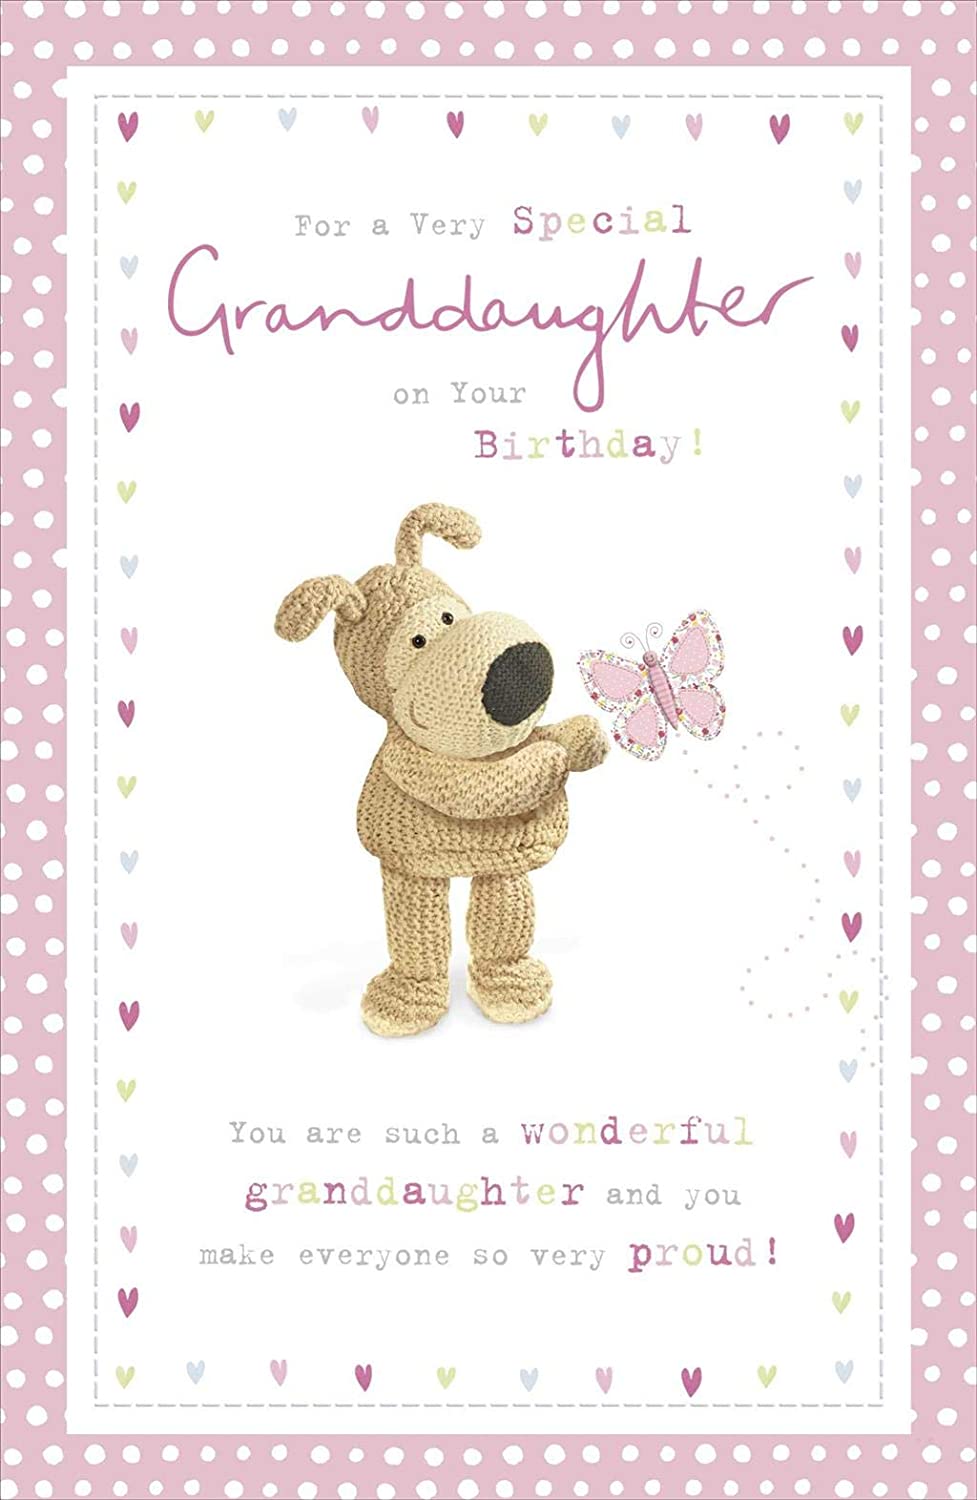 Granddaughter Birthday Card - Boofles And A Pretty Butterfly